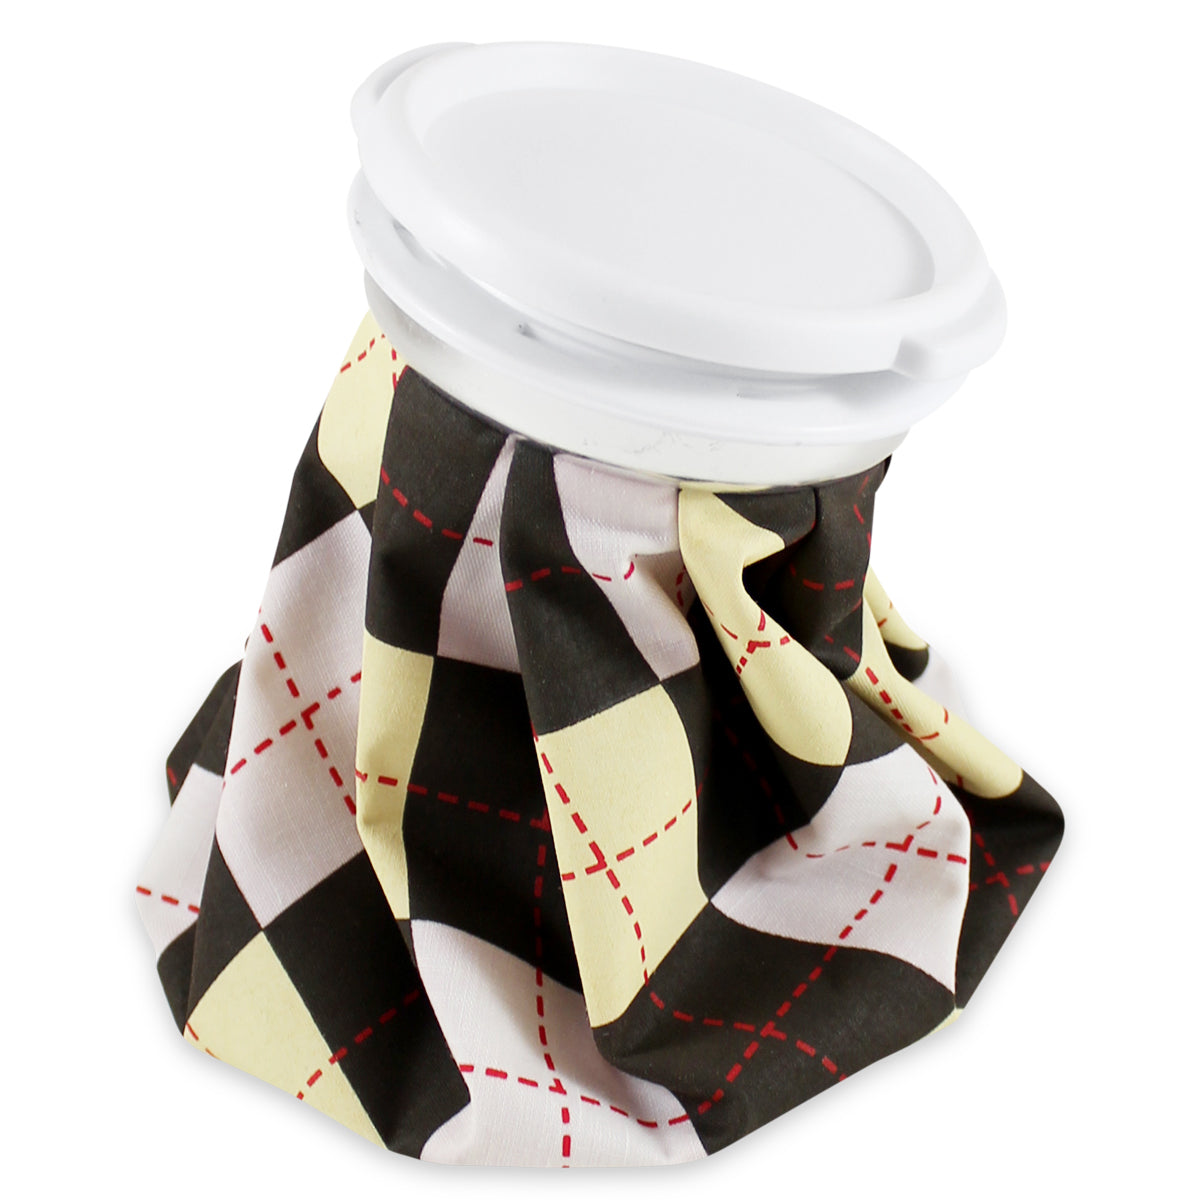 Primary image of Ice Bag - Brown Argyle